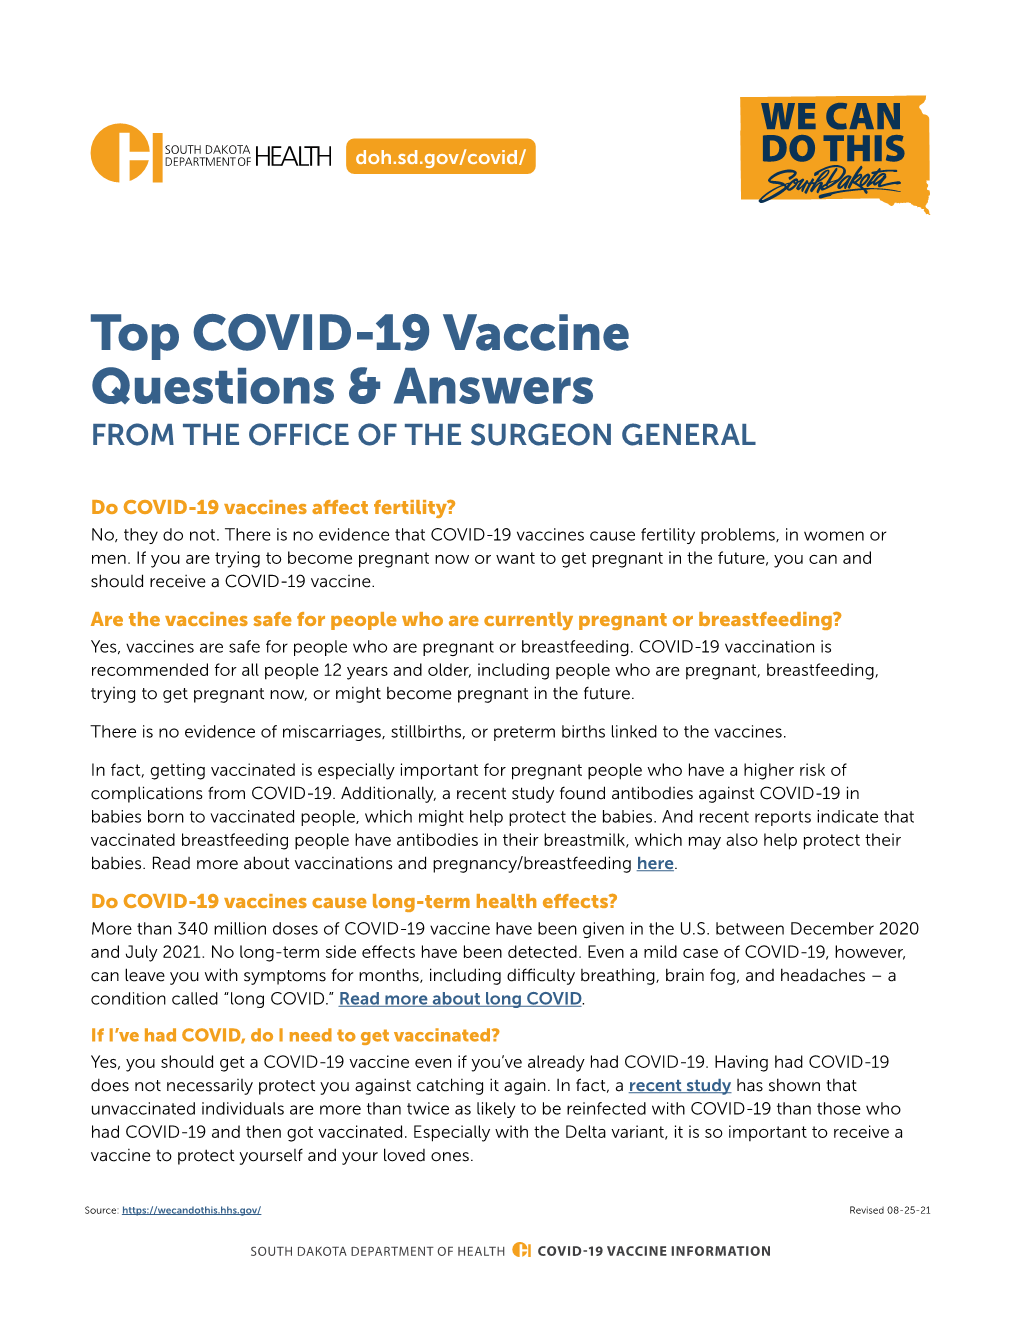 Top COVID-19 Vaccine Questions & Answers